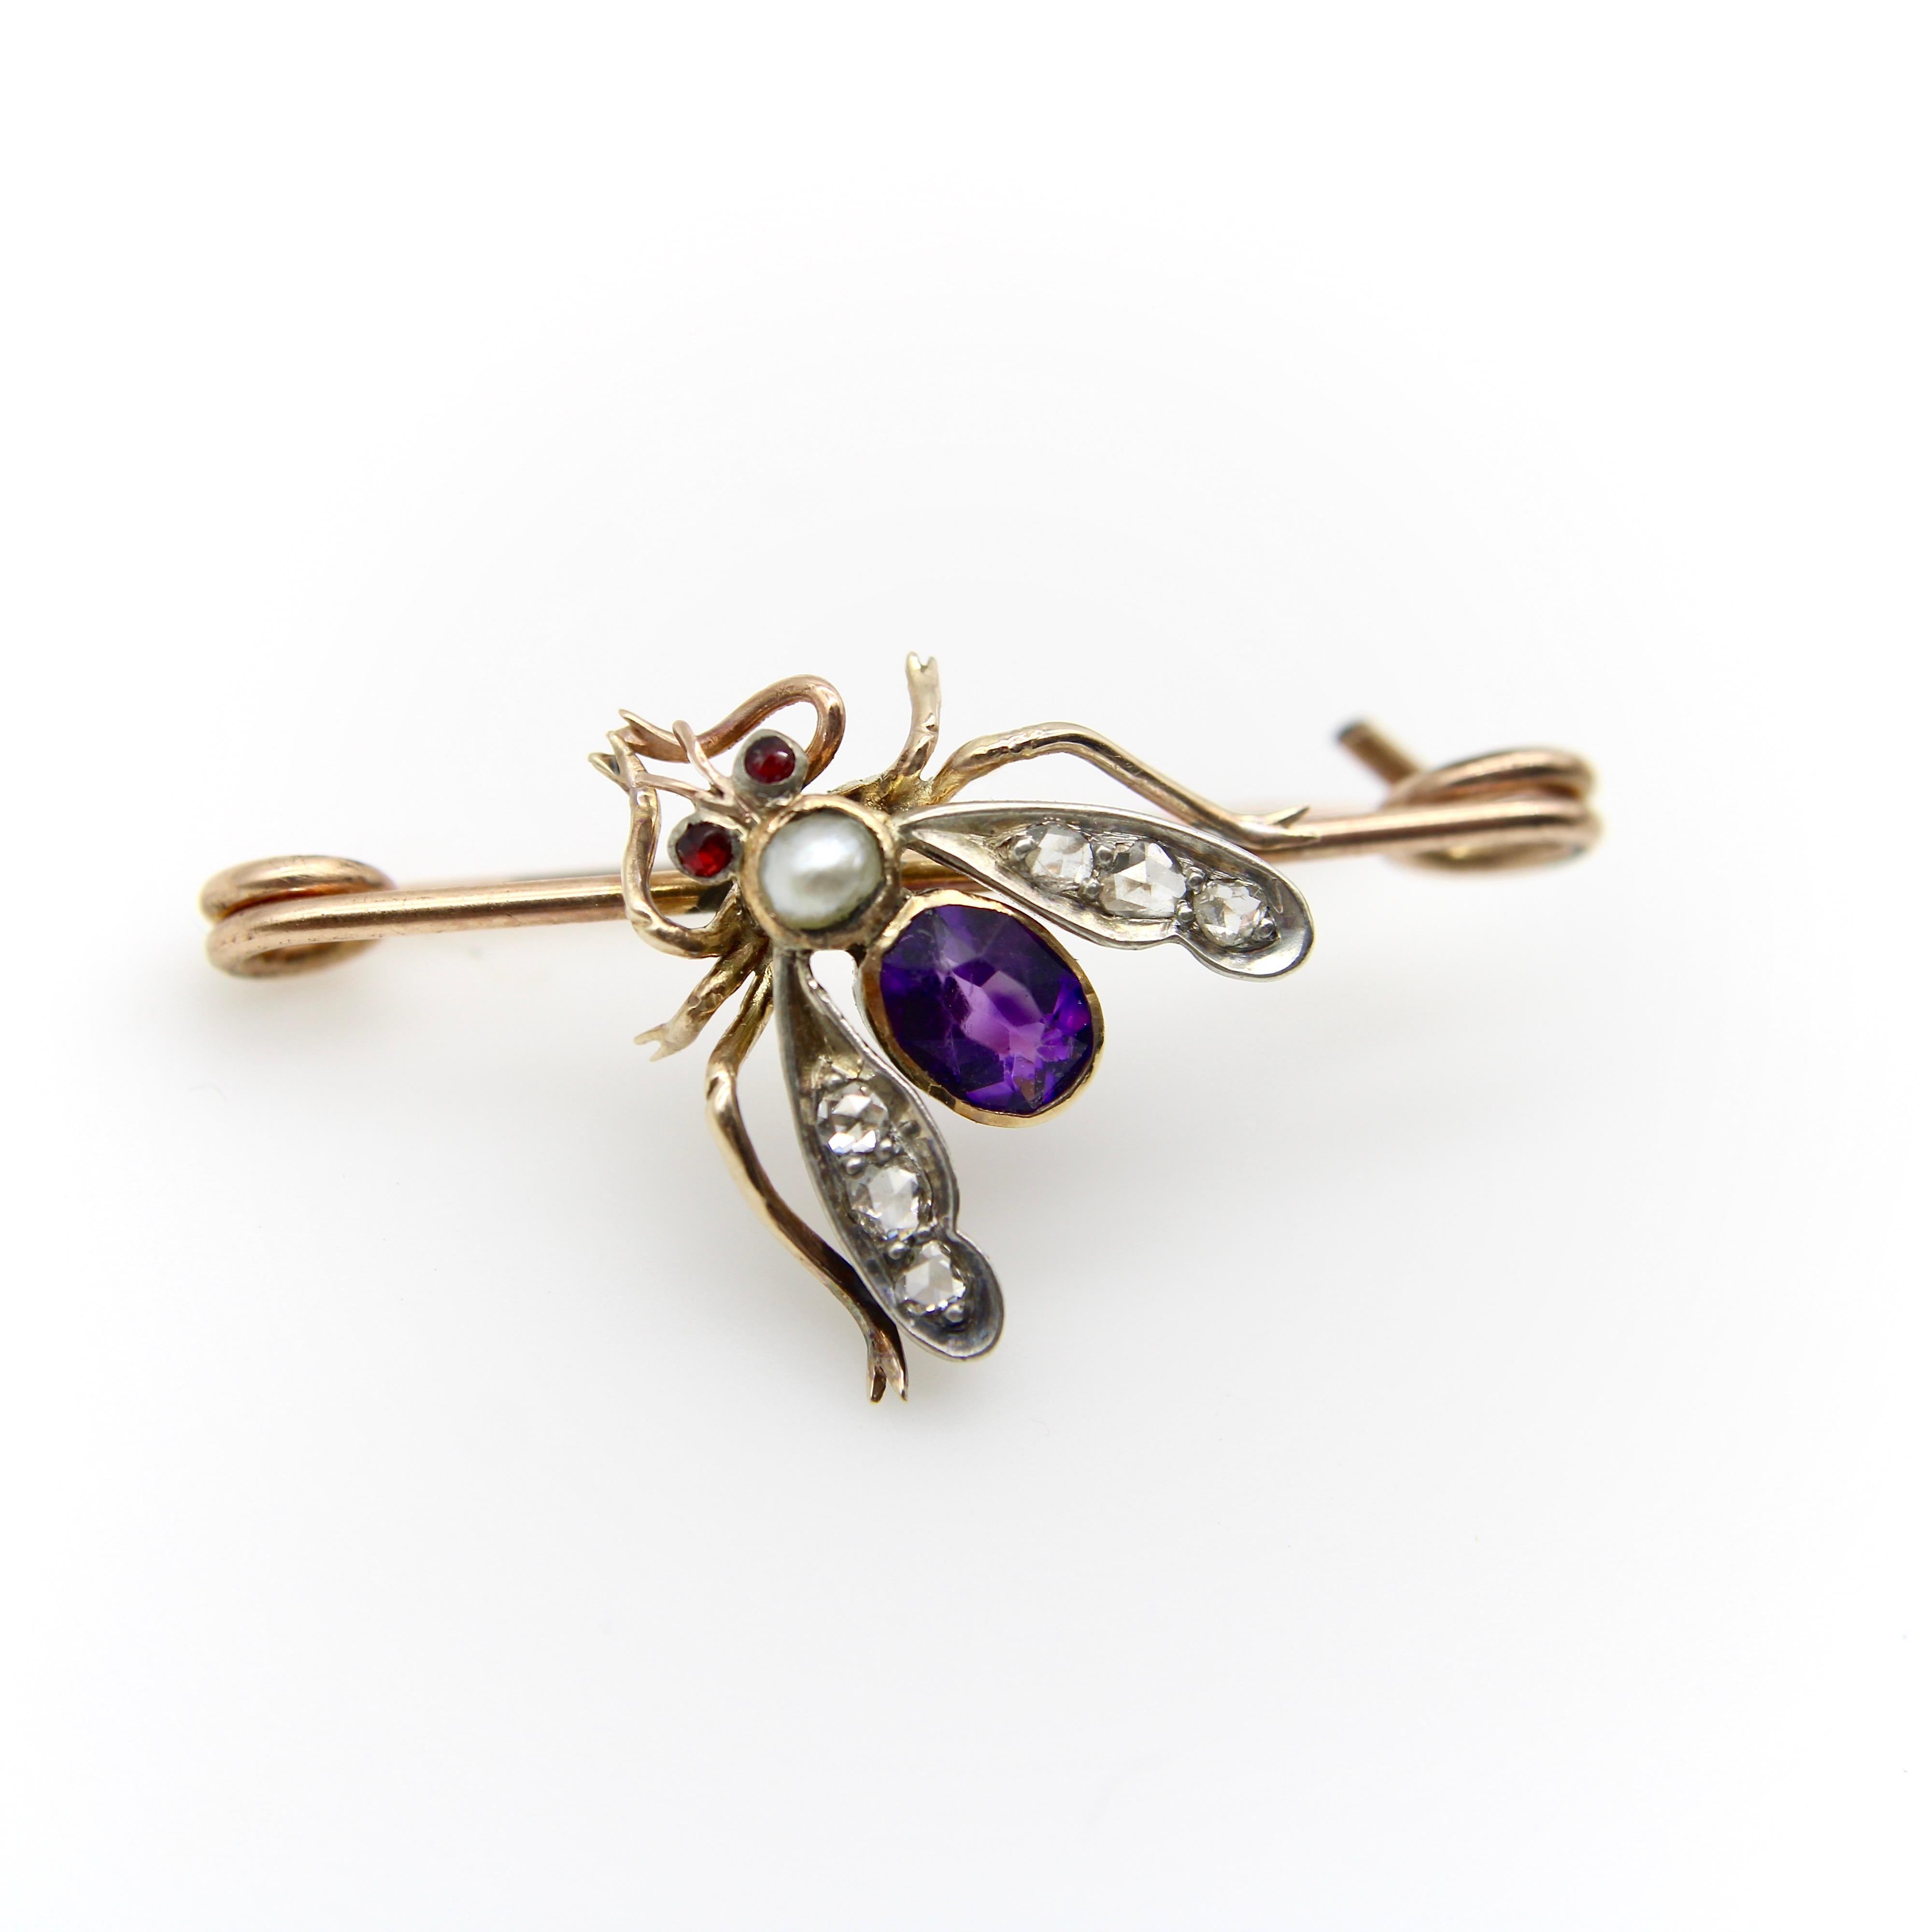 This 12k gold Victorian brooch is meticulously crafted with superb attention to detail. The adorable fly is jewel encrusted, with wings carved out to house beautiful Old Rose Cut diamonds while an amethyst and pearl make up the body of the fly. The